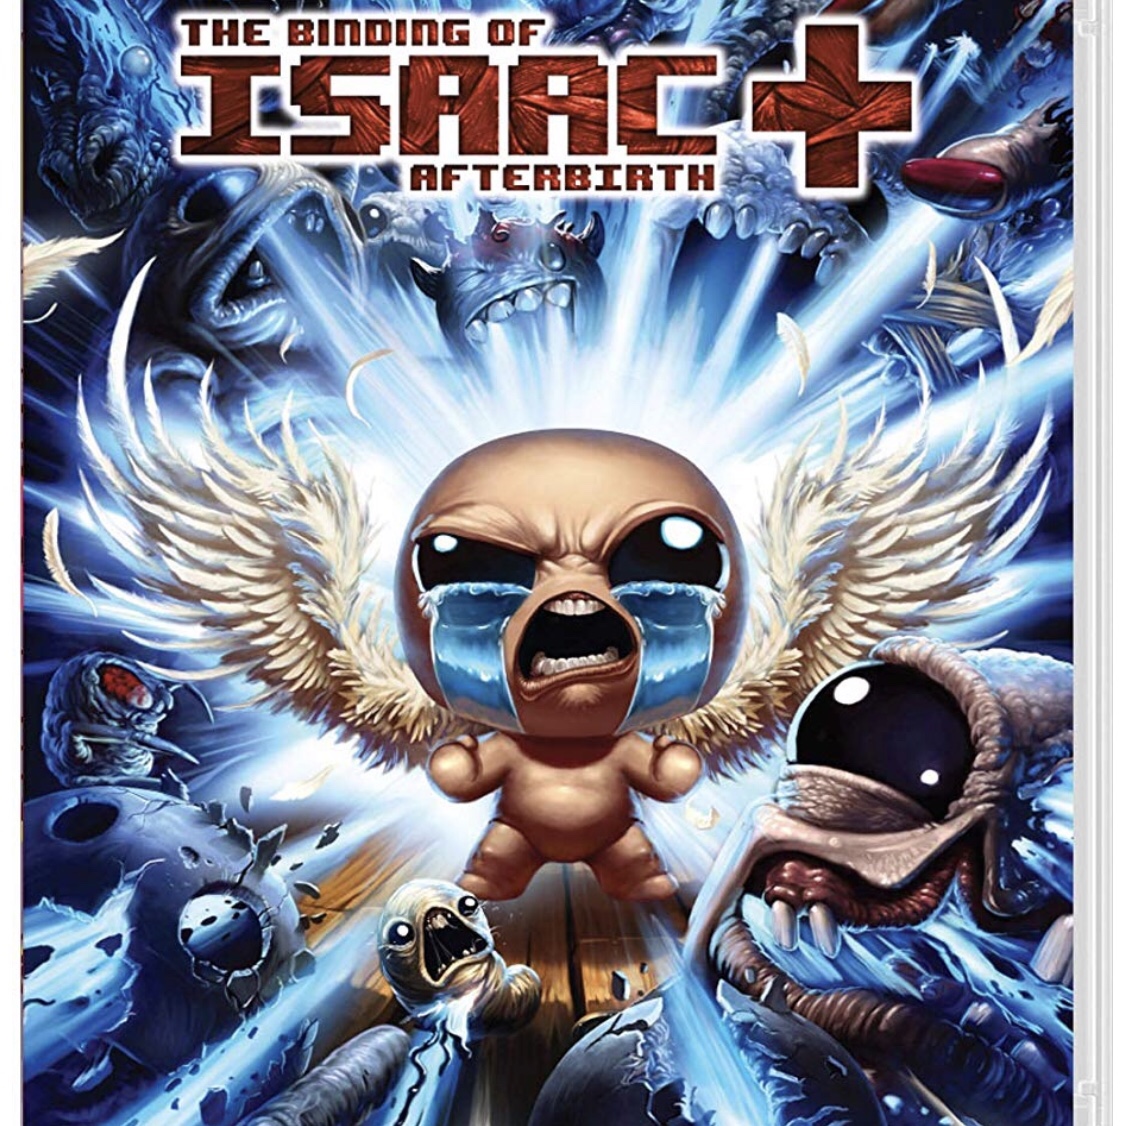 the binding of isaac switch